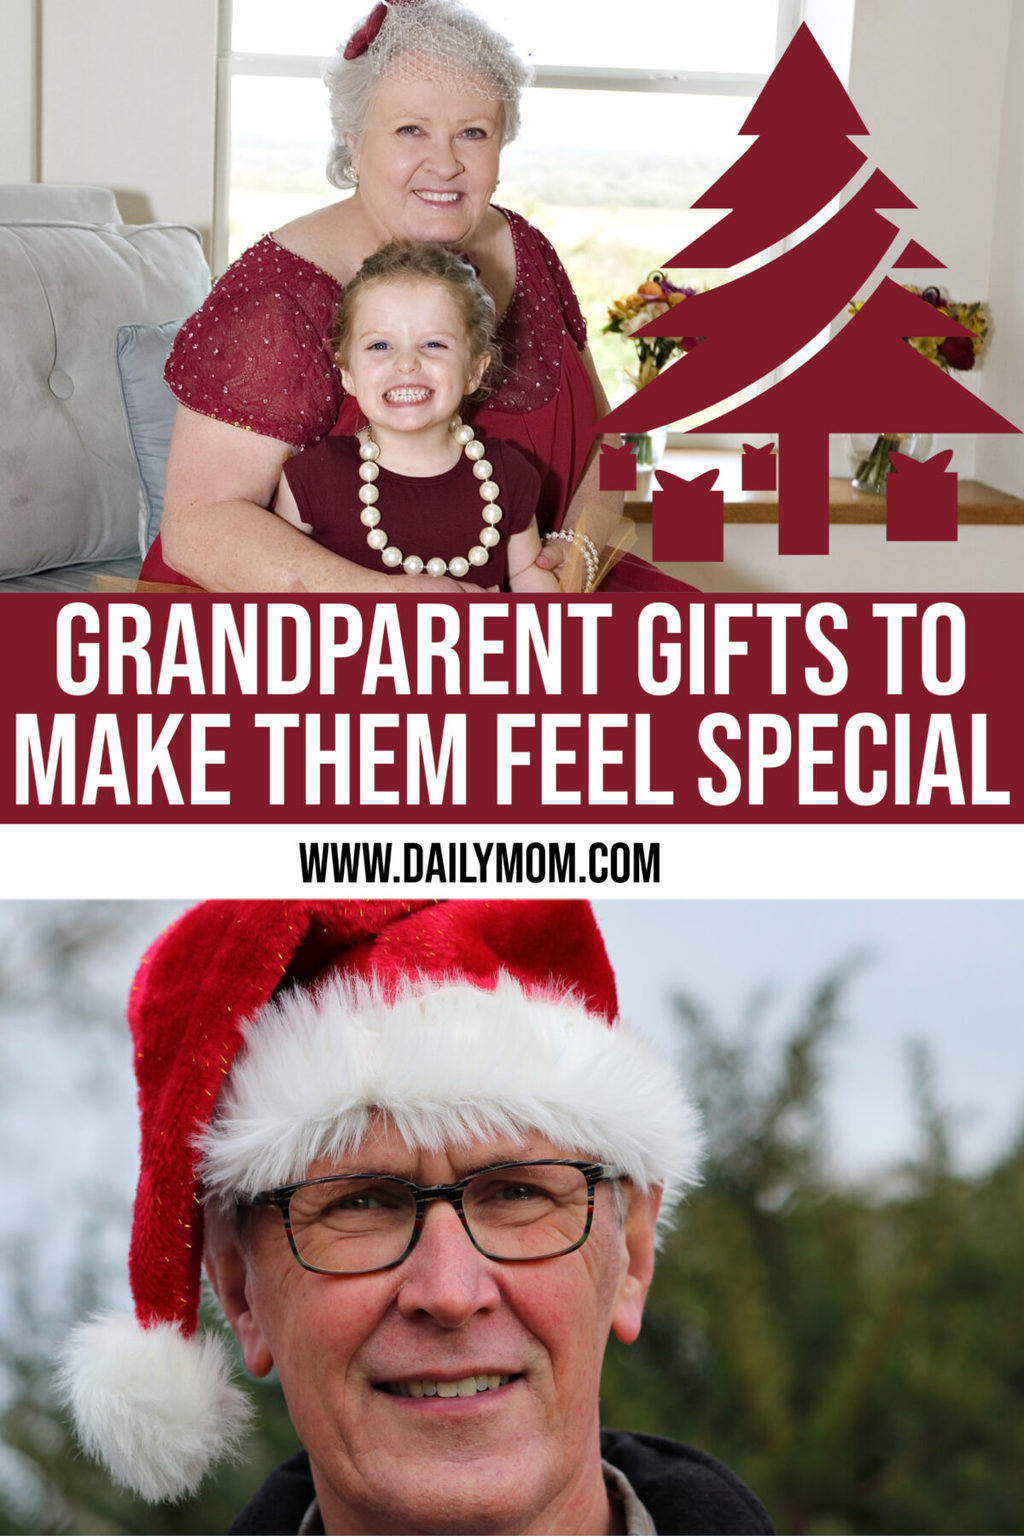 20 Great Gifts For Grandparents On Christmas